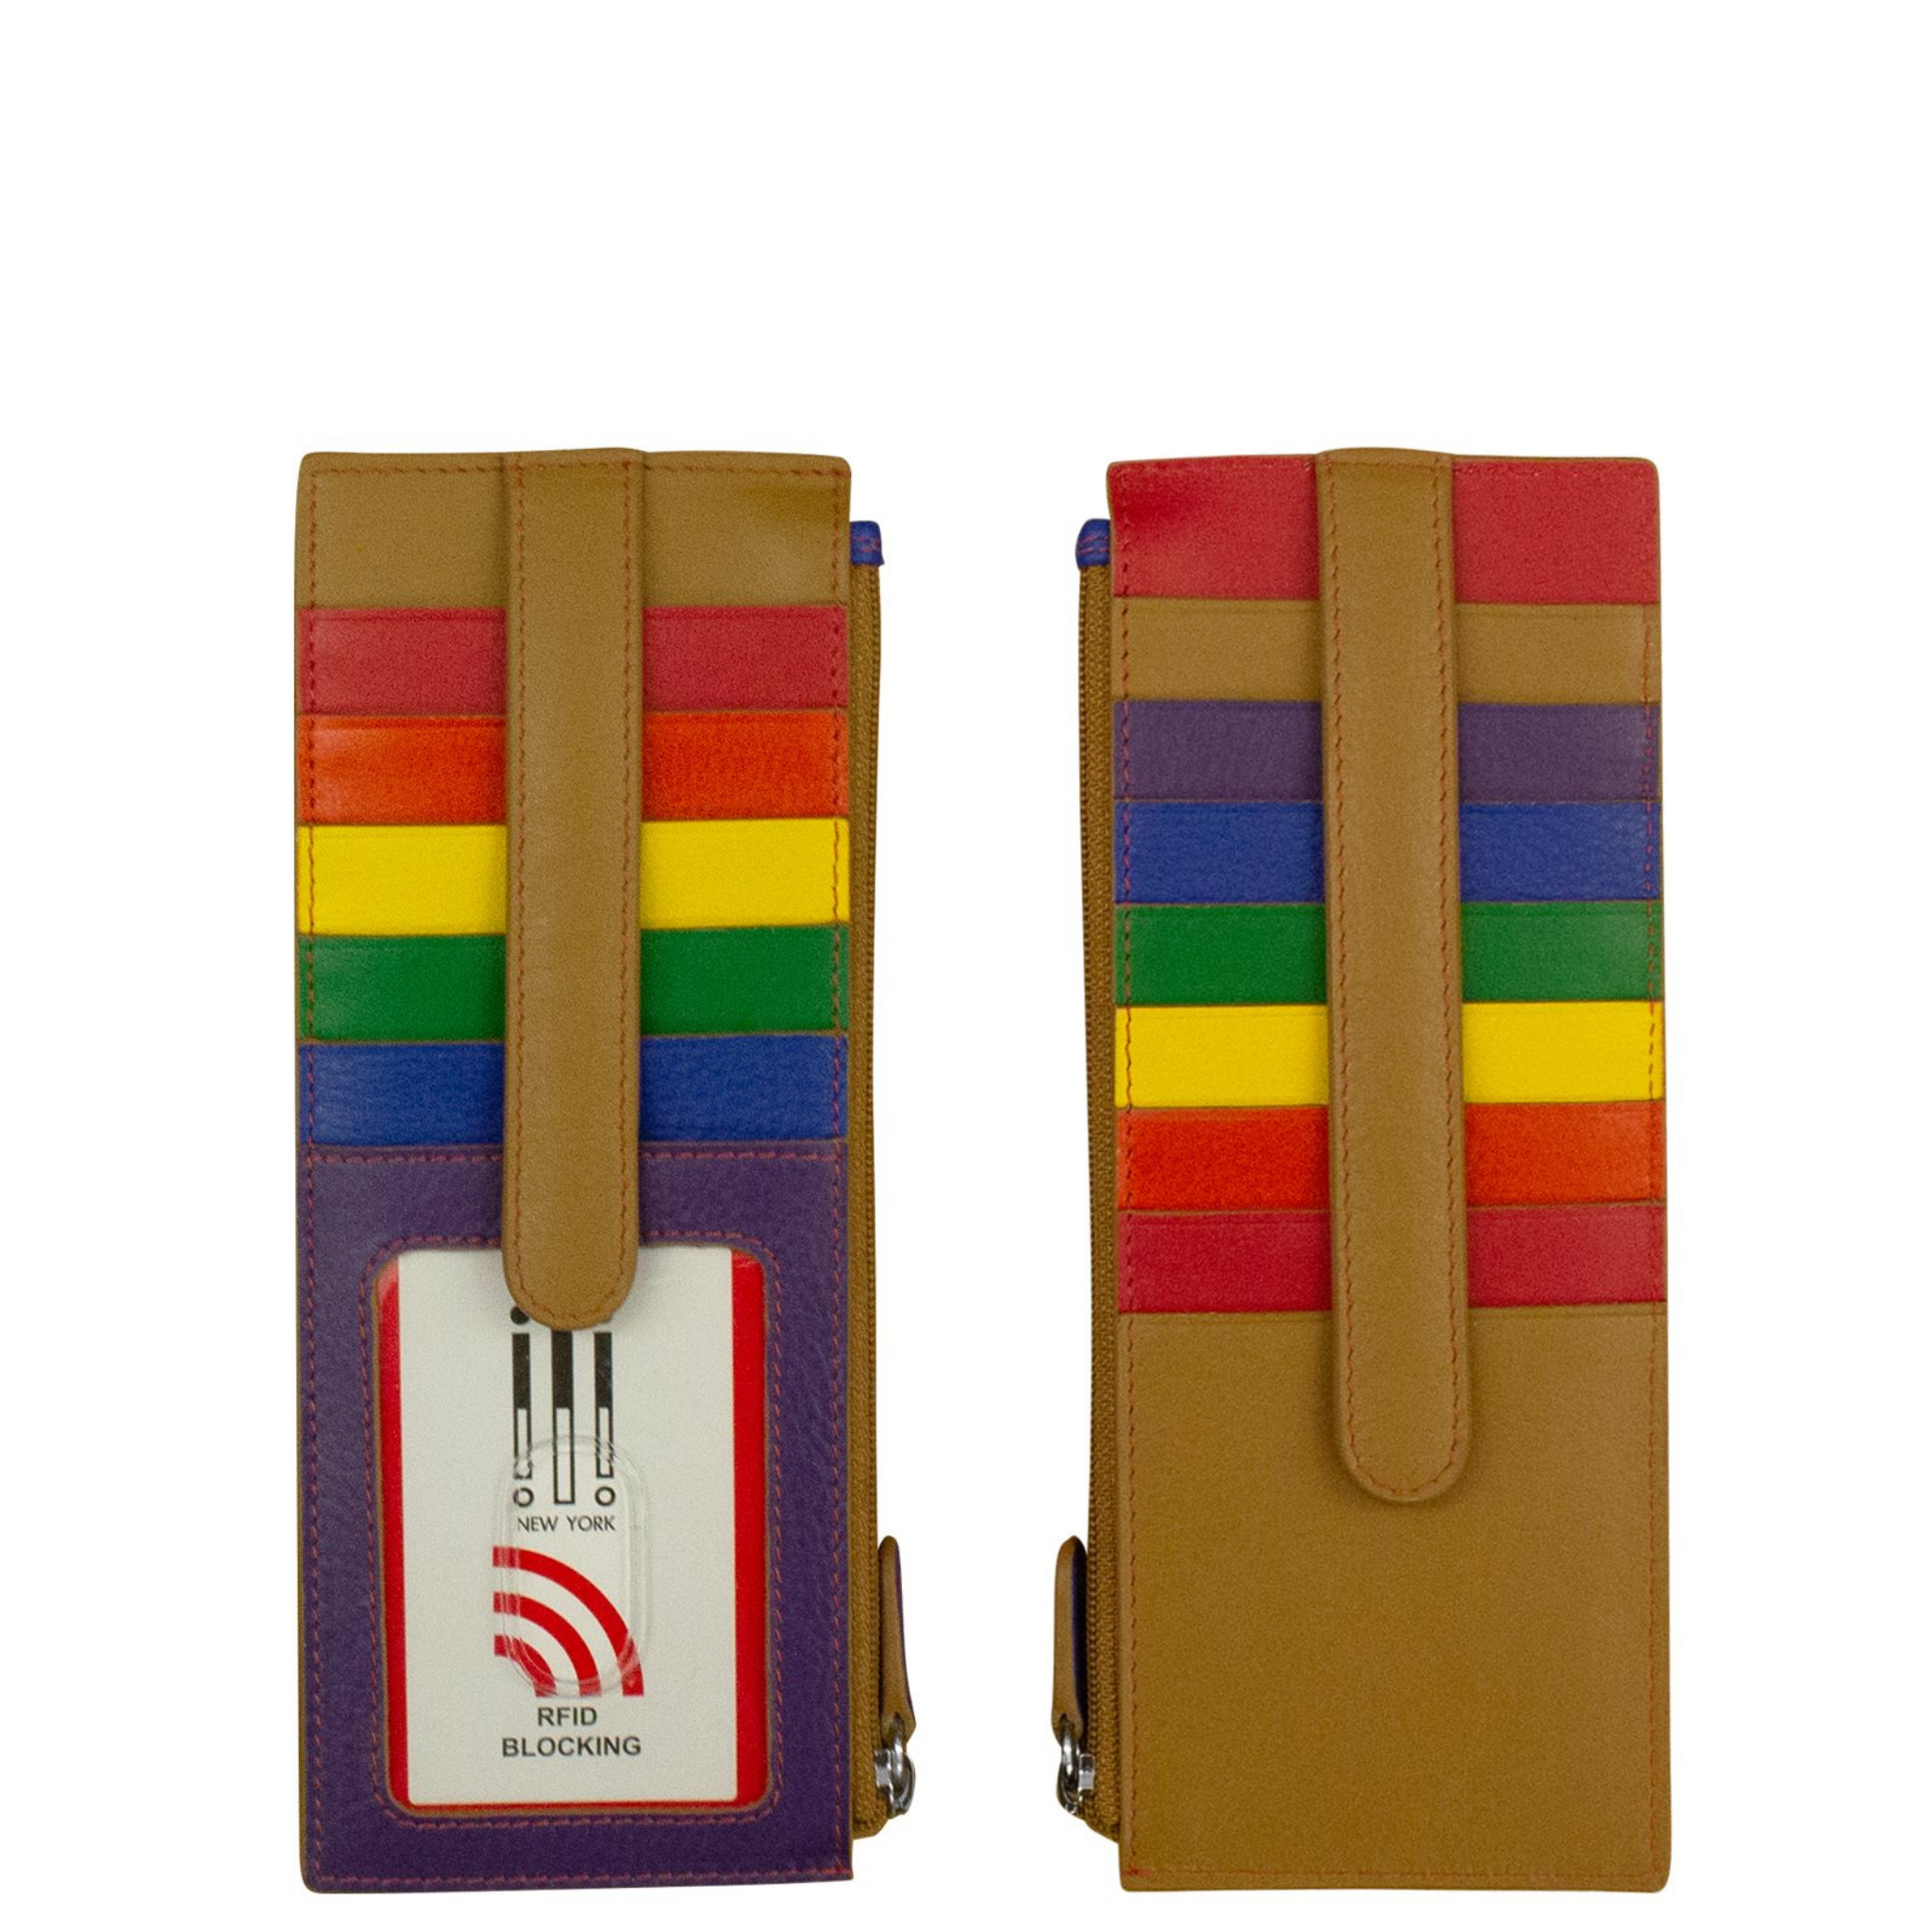 Double sided credit card holder, RFID blocking